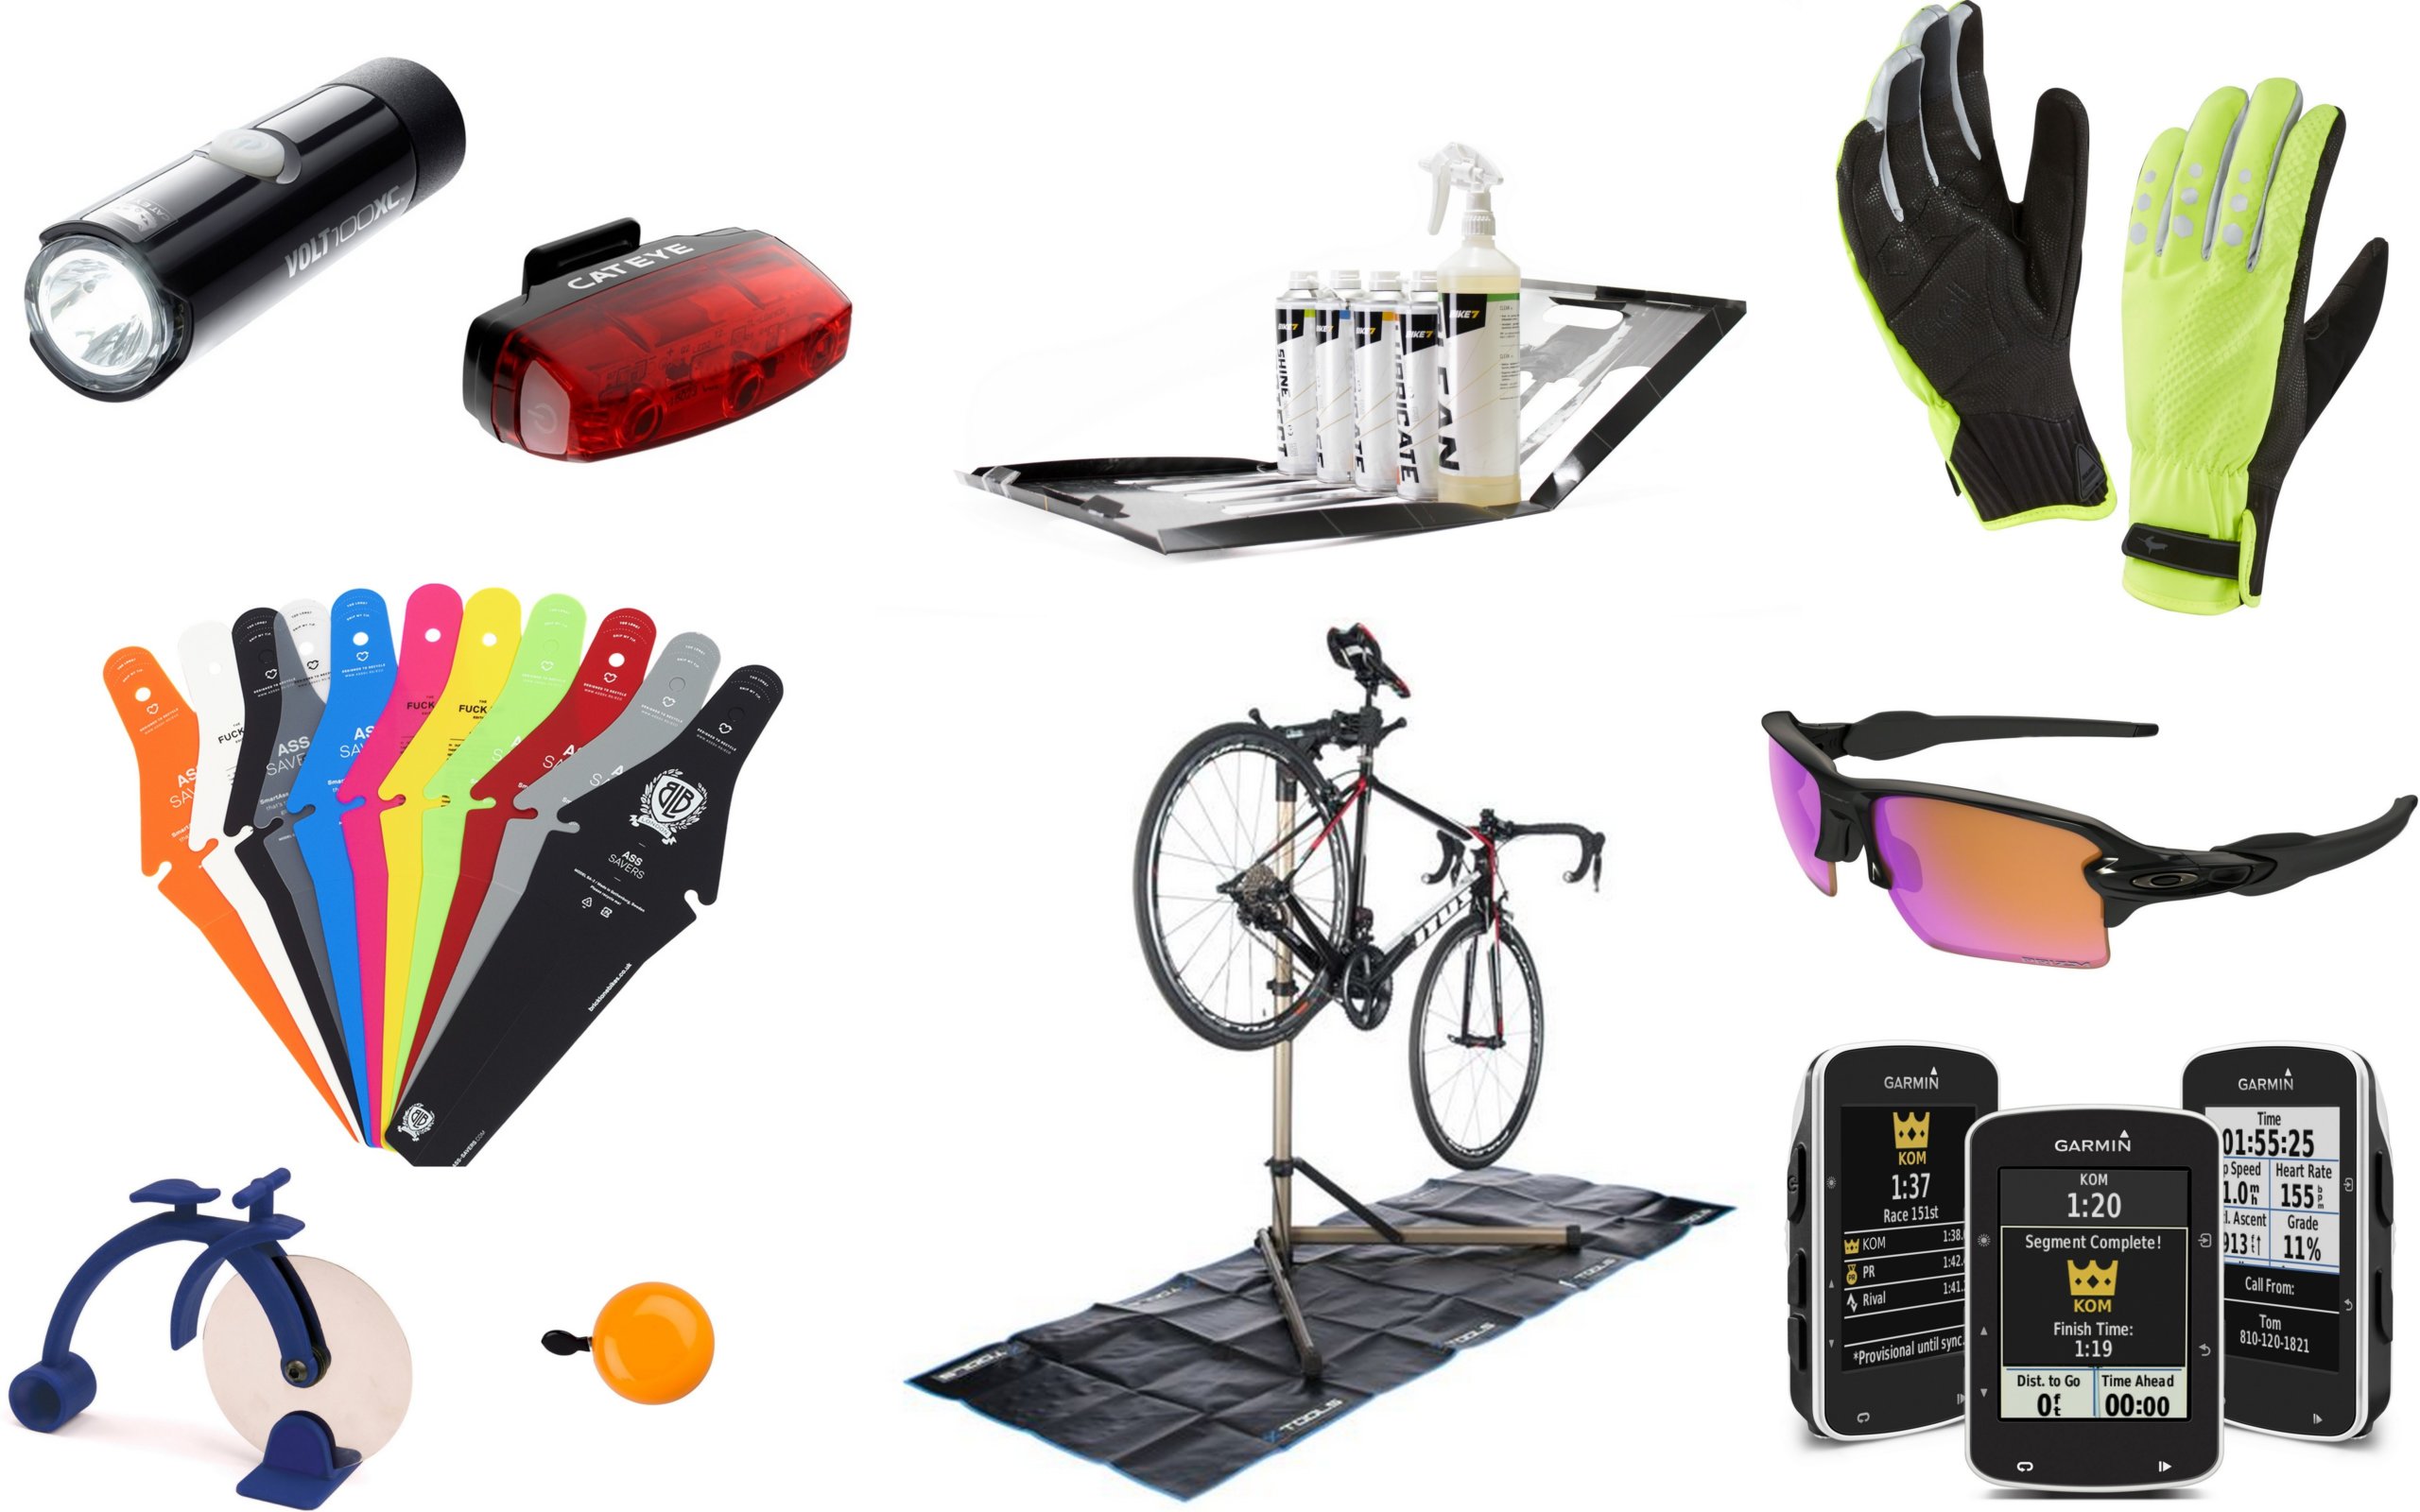 Gift Ideas for Every Cyclist